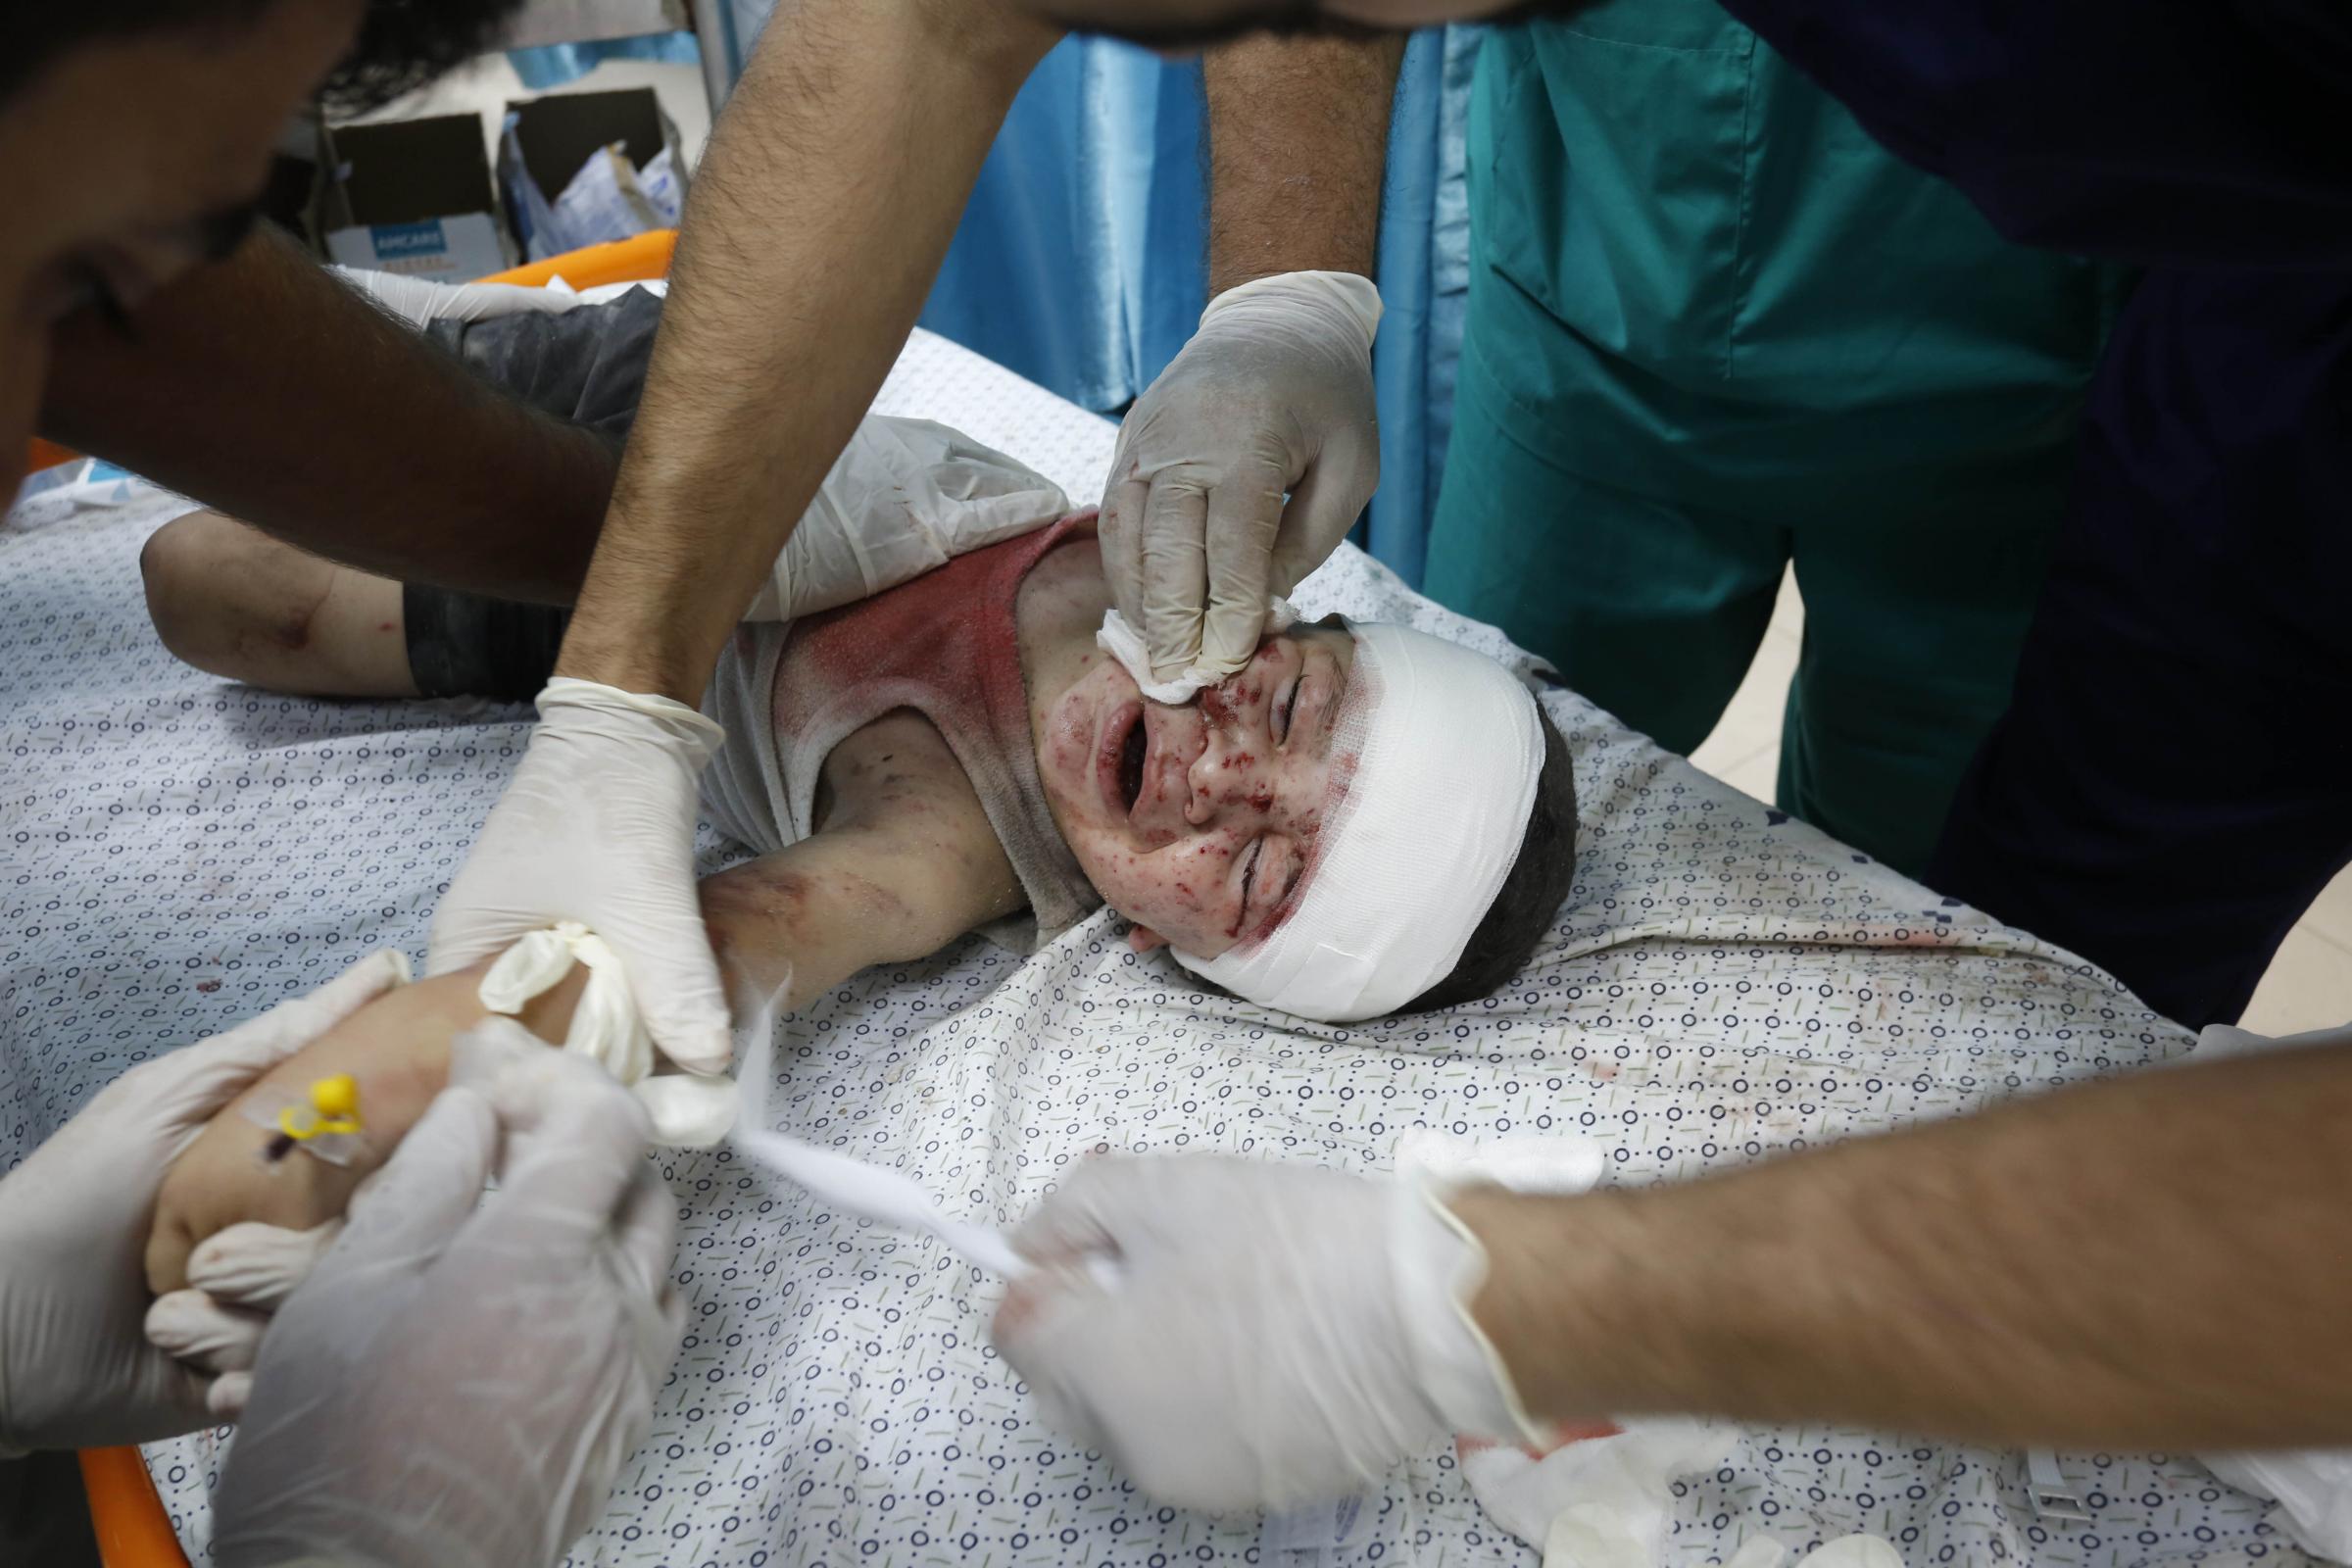 DEIR AL BALAH, GAZA - OCTOBER 14: (EDITORS NOTE: Image depicts graphic content) Doctors examine an injured child at Al-Aqsa Martyr Hospital after being found in search and rescue operations launched around buildings that were destroyed or heavily damaged